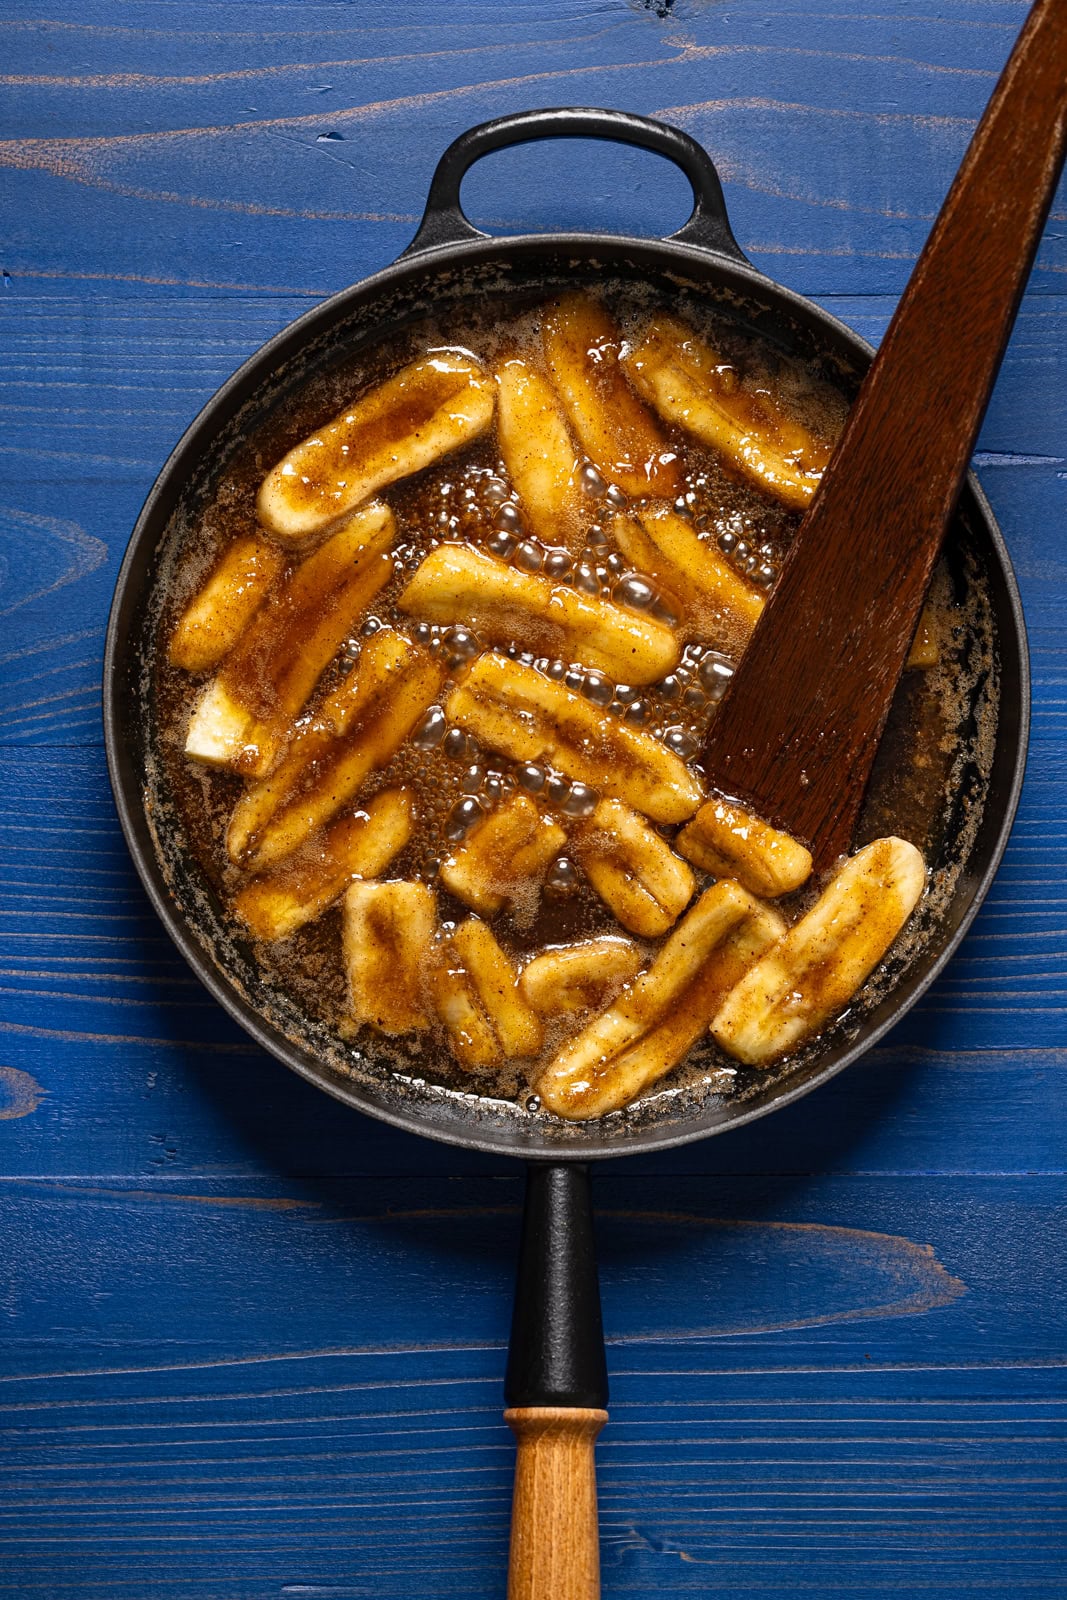 Caramelized bananas in a black skillet with a wooden spoon.